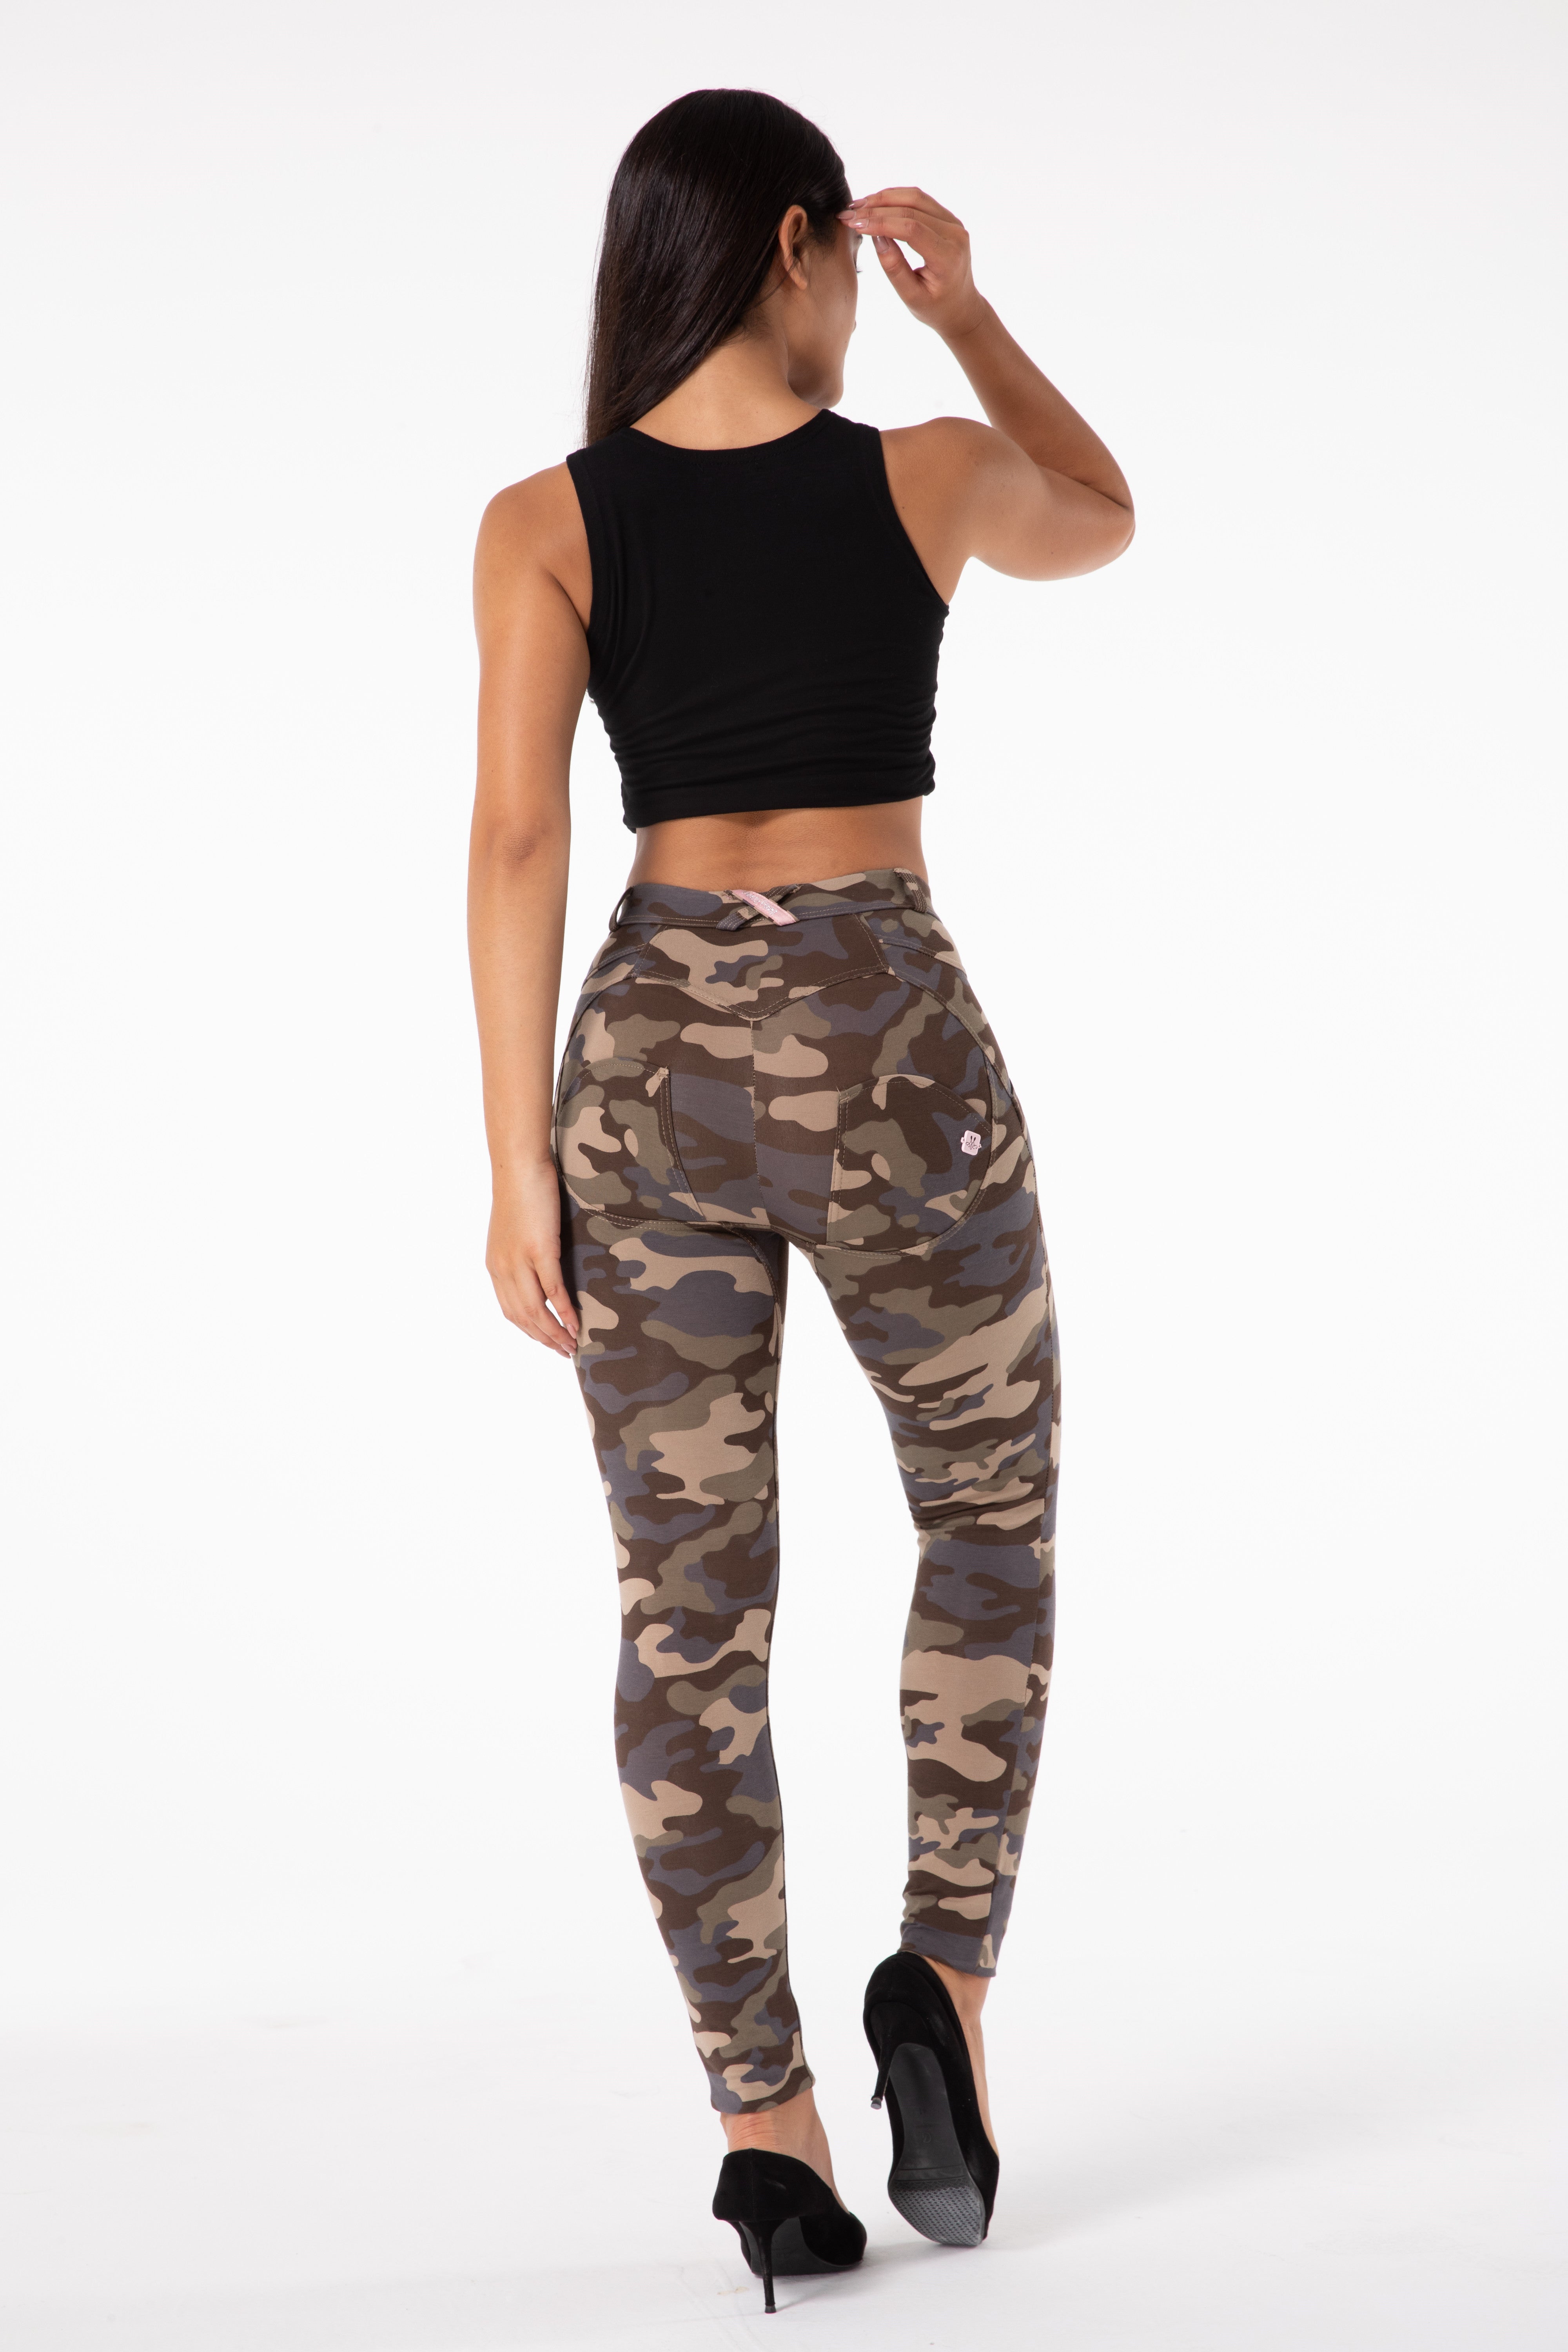 Shascullfites Melody push up camo workout leggings yoga leggings compression for women